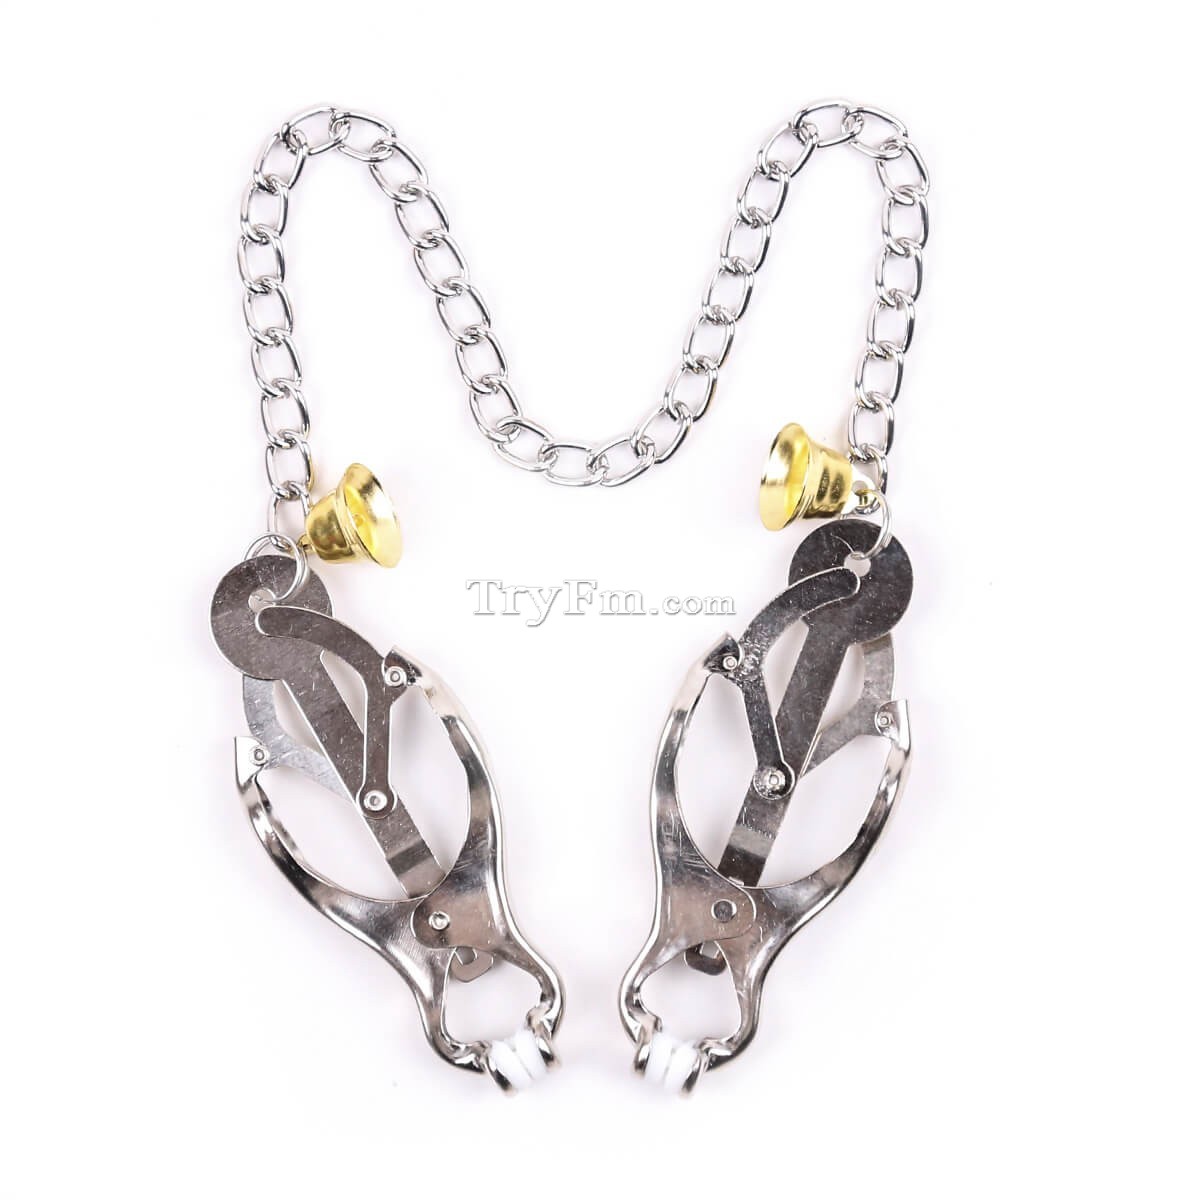 5-nipple-clamp-with-chain-and-bell7.jpg